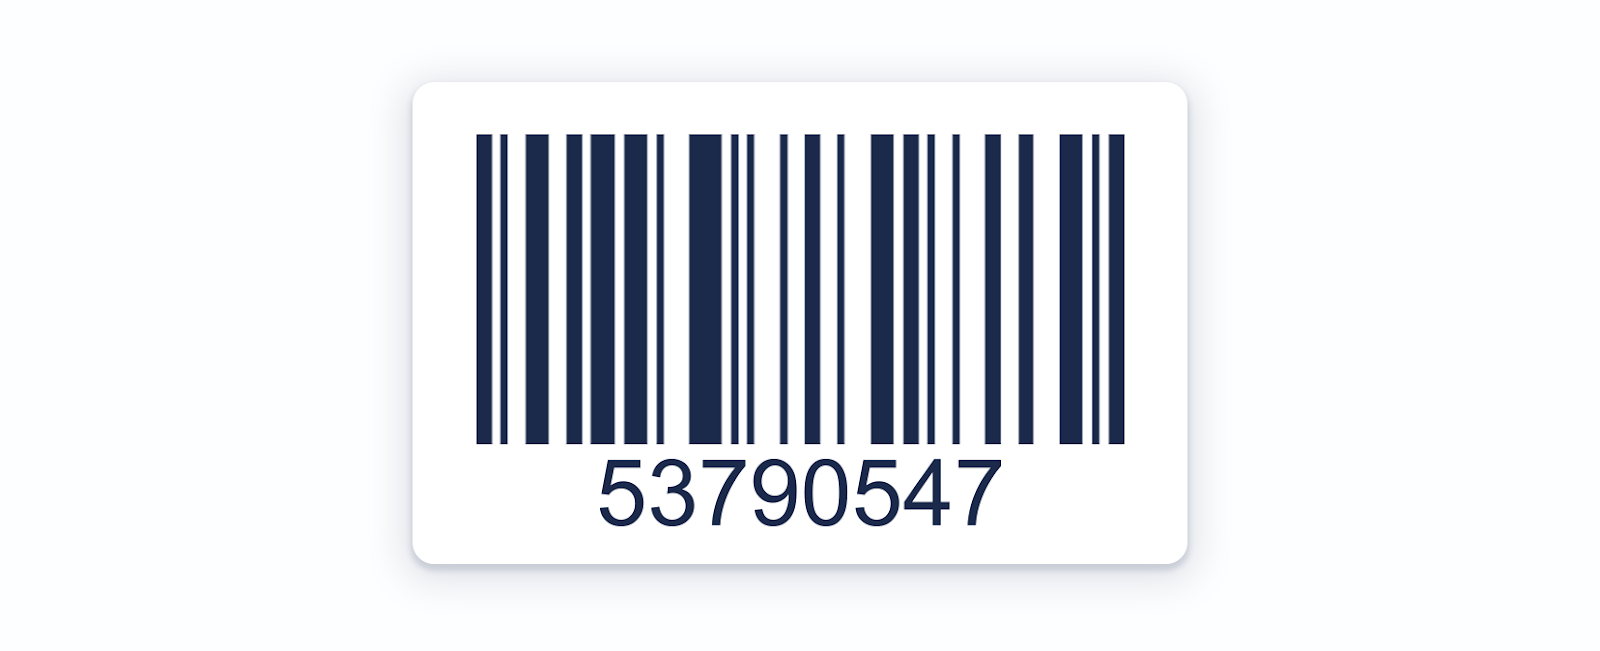 An example of a barcode with basic structure